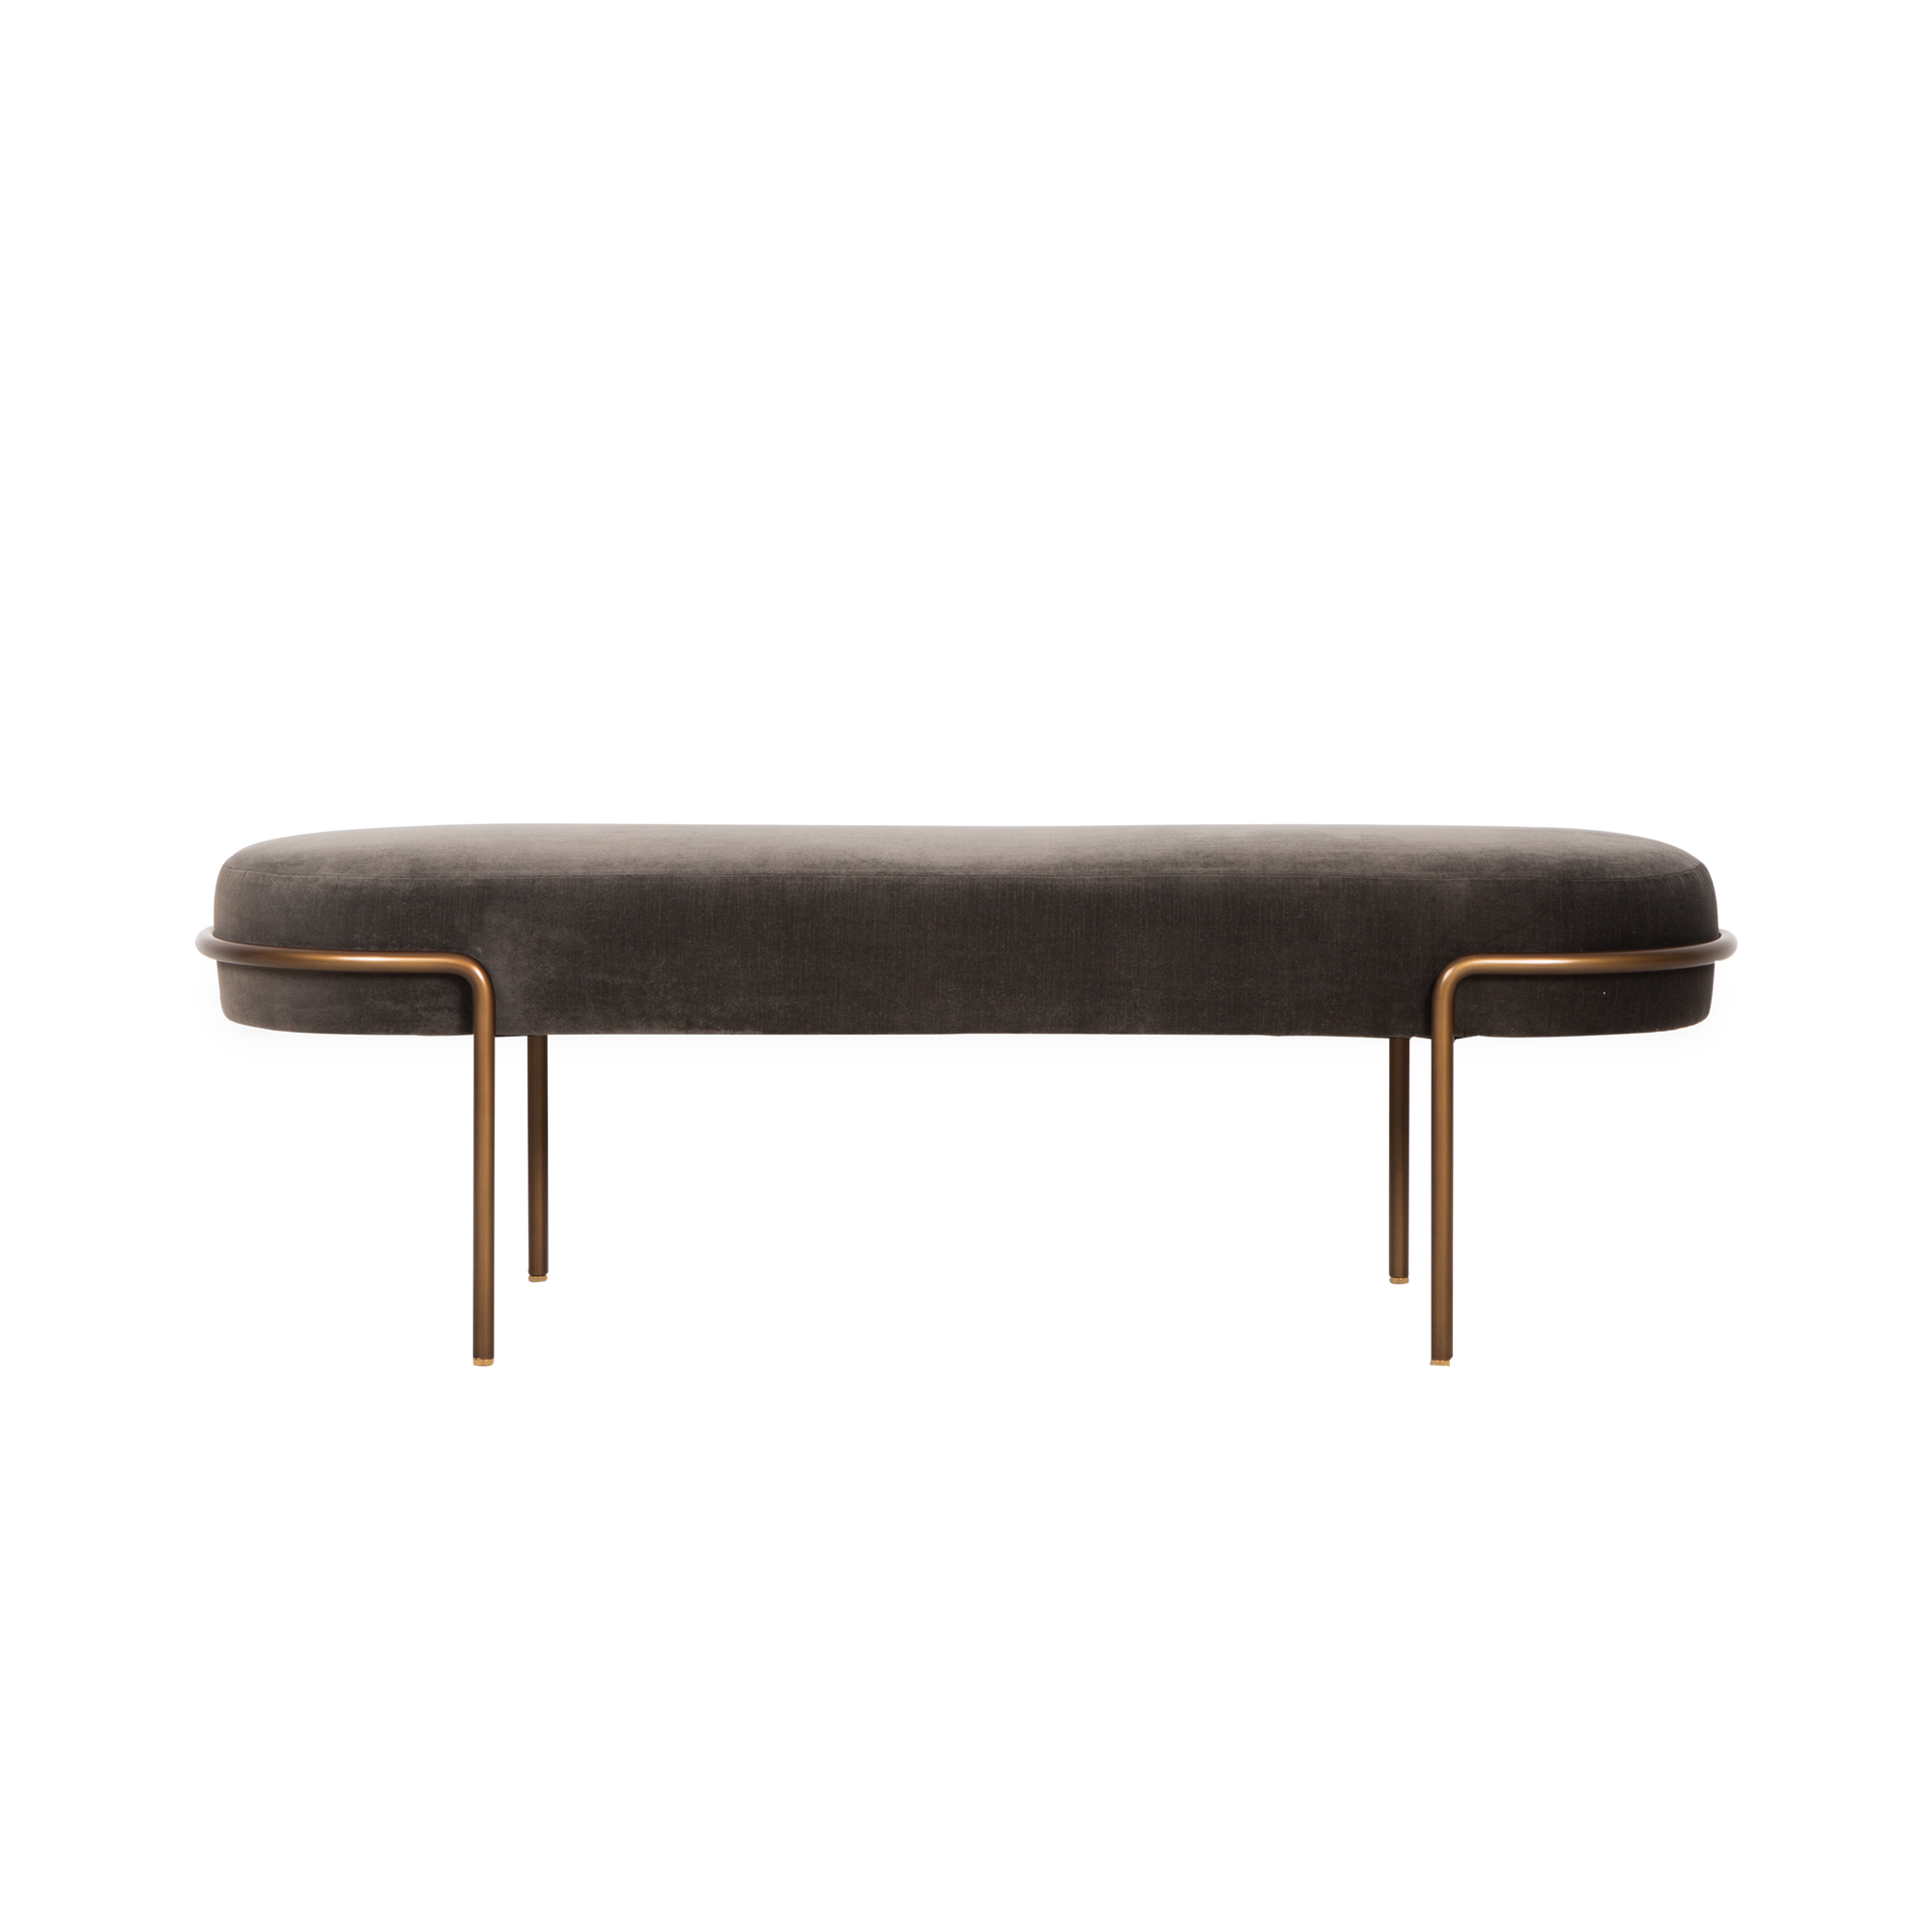 Displaying mid-century elegance, the Sligh Bench will add a touch of sophistication to any space you place it in.